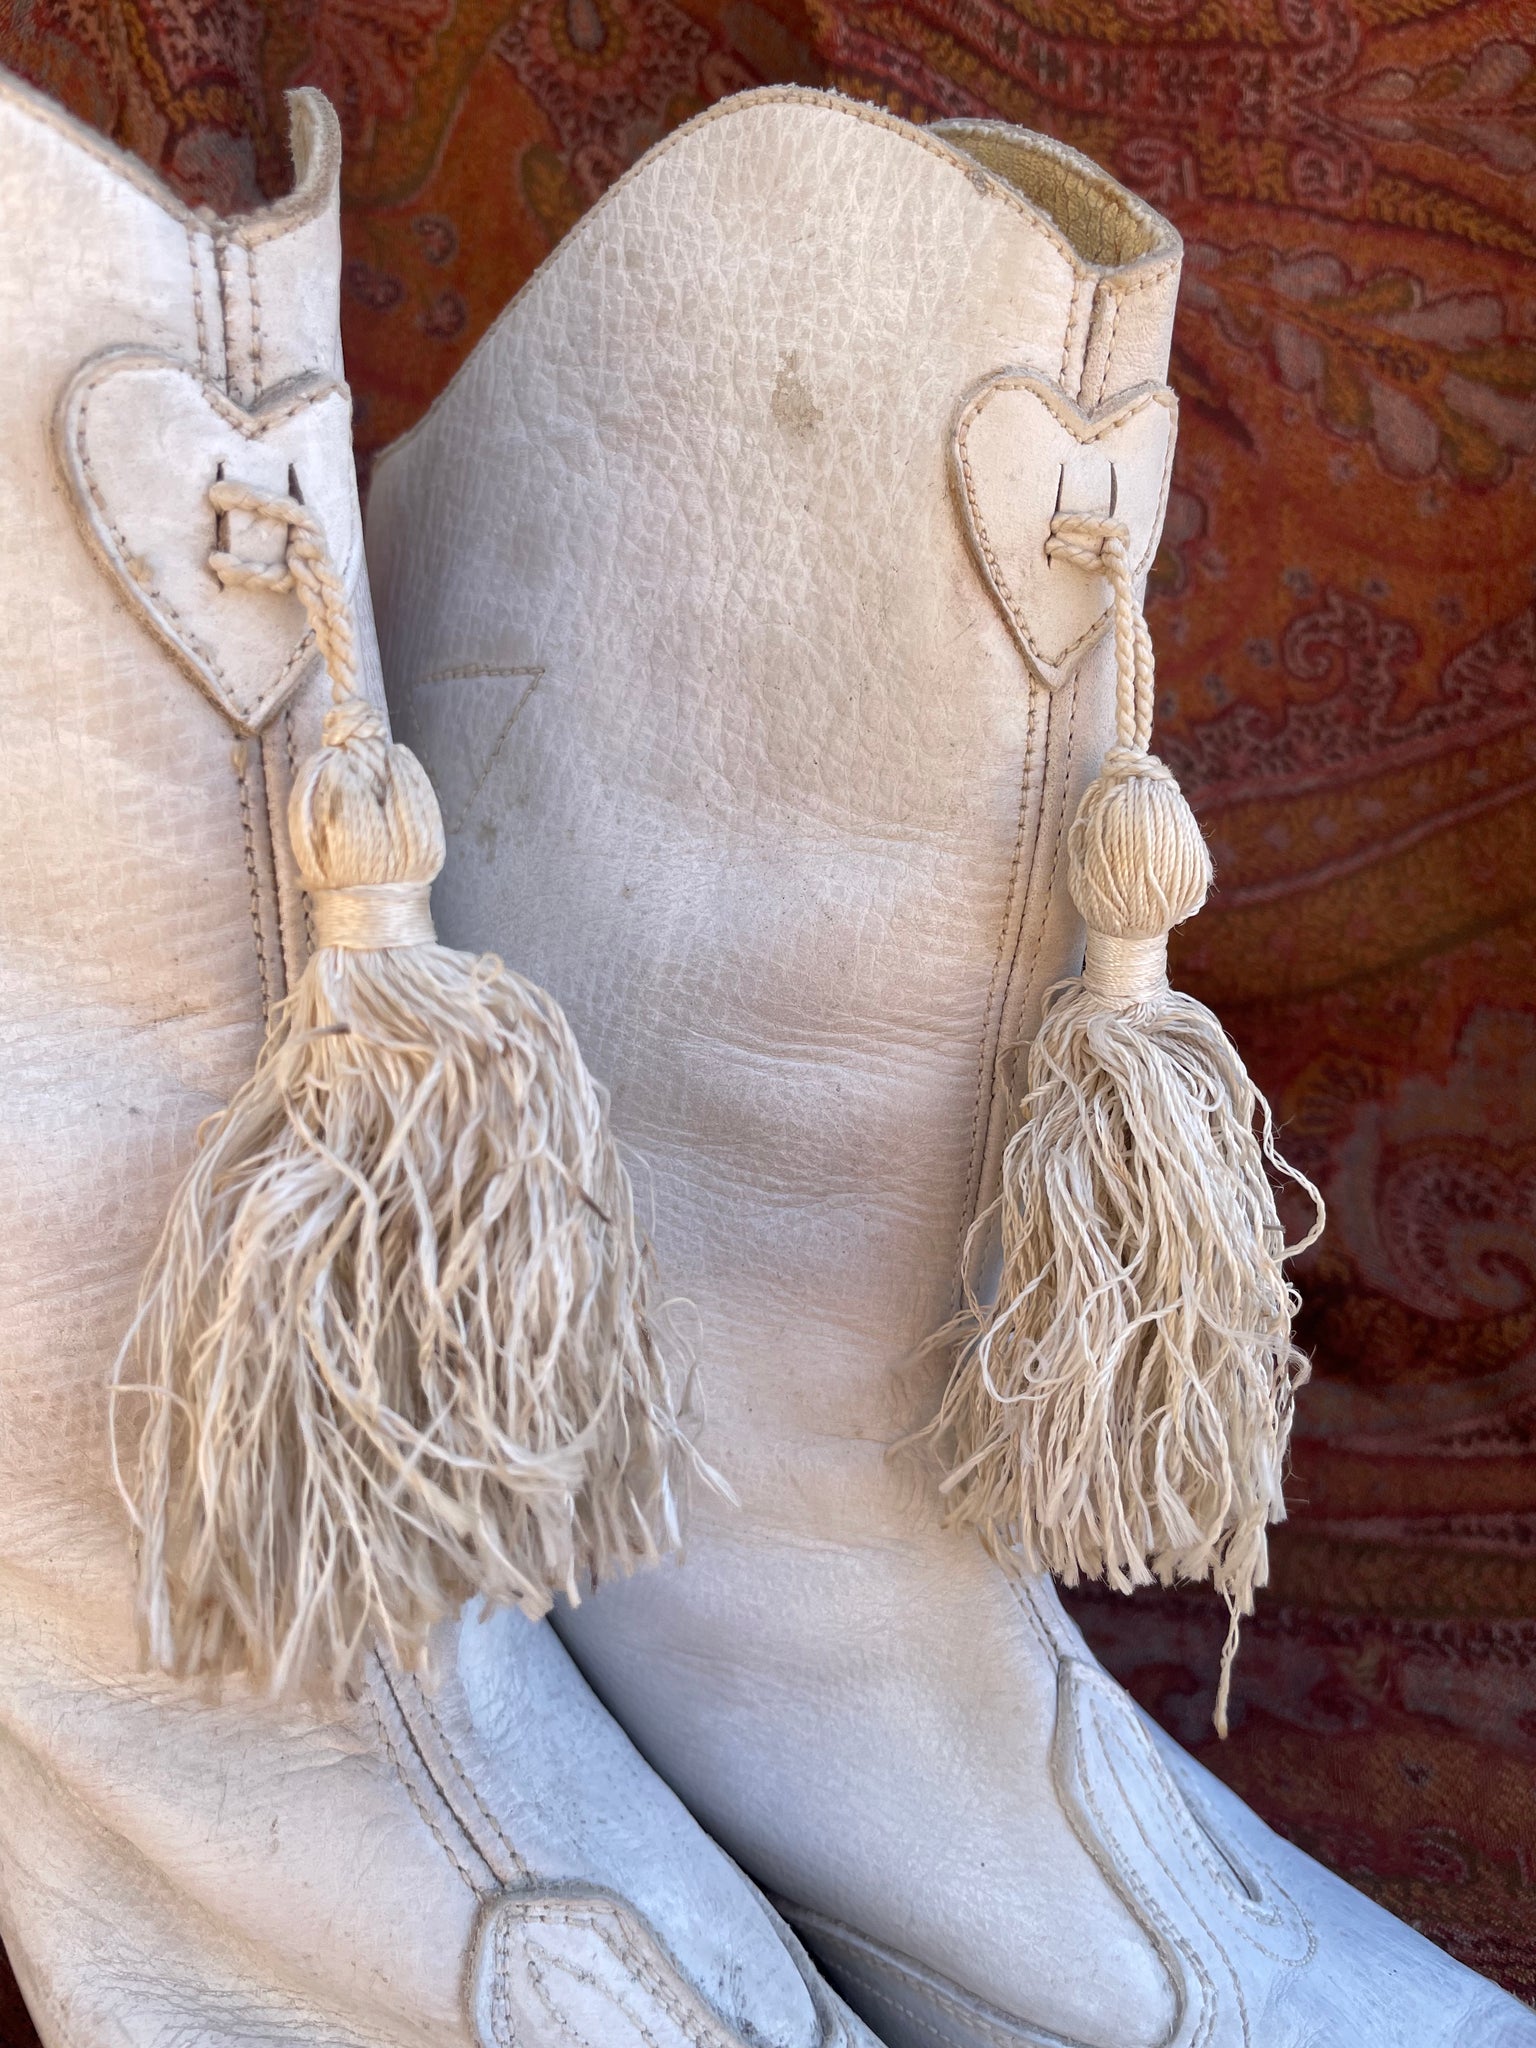 1950s Majorette Marching Boots With Tassels